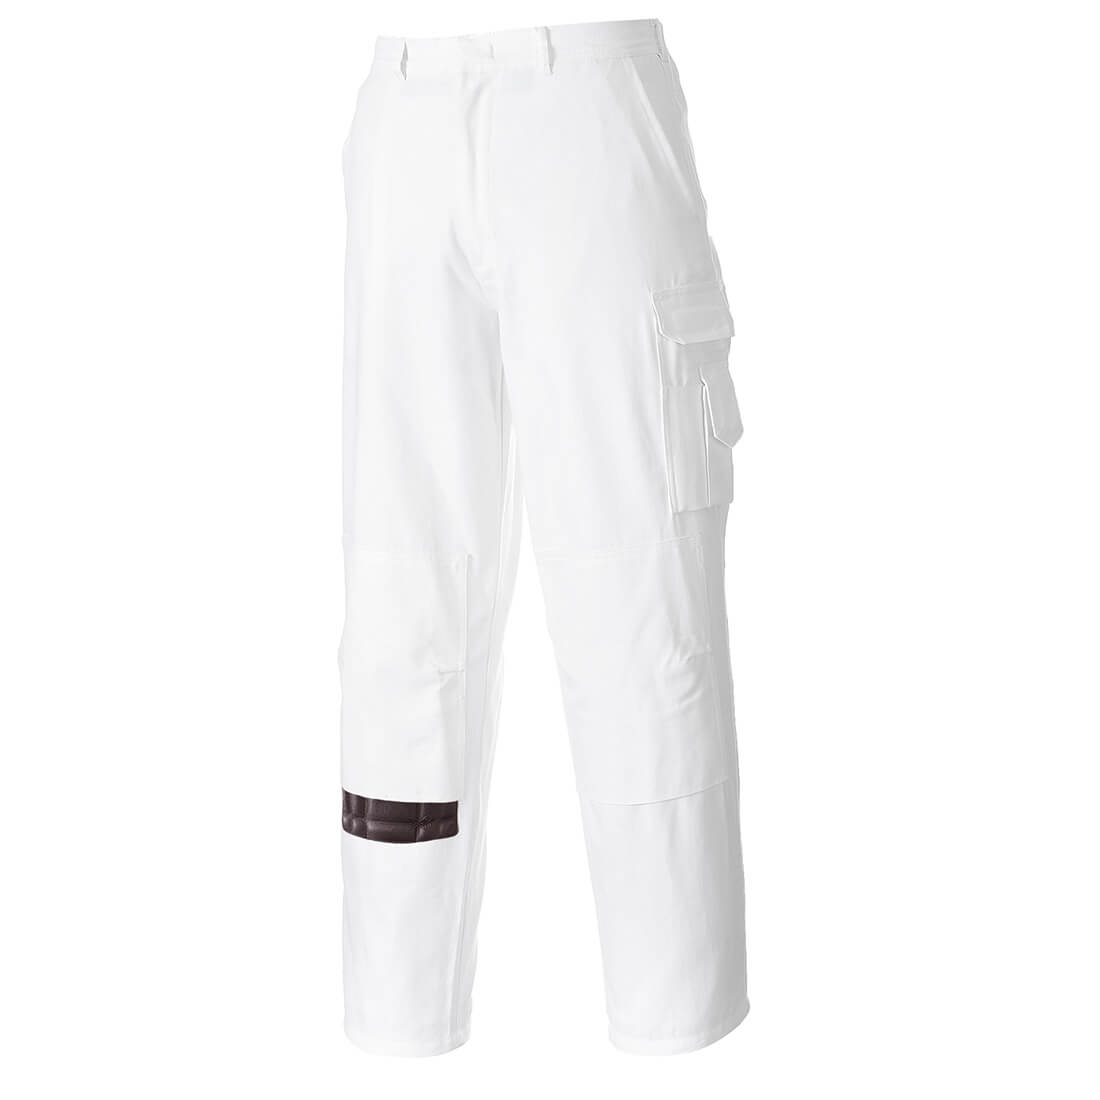 Image of Portwest Painters Trousers White L 31"